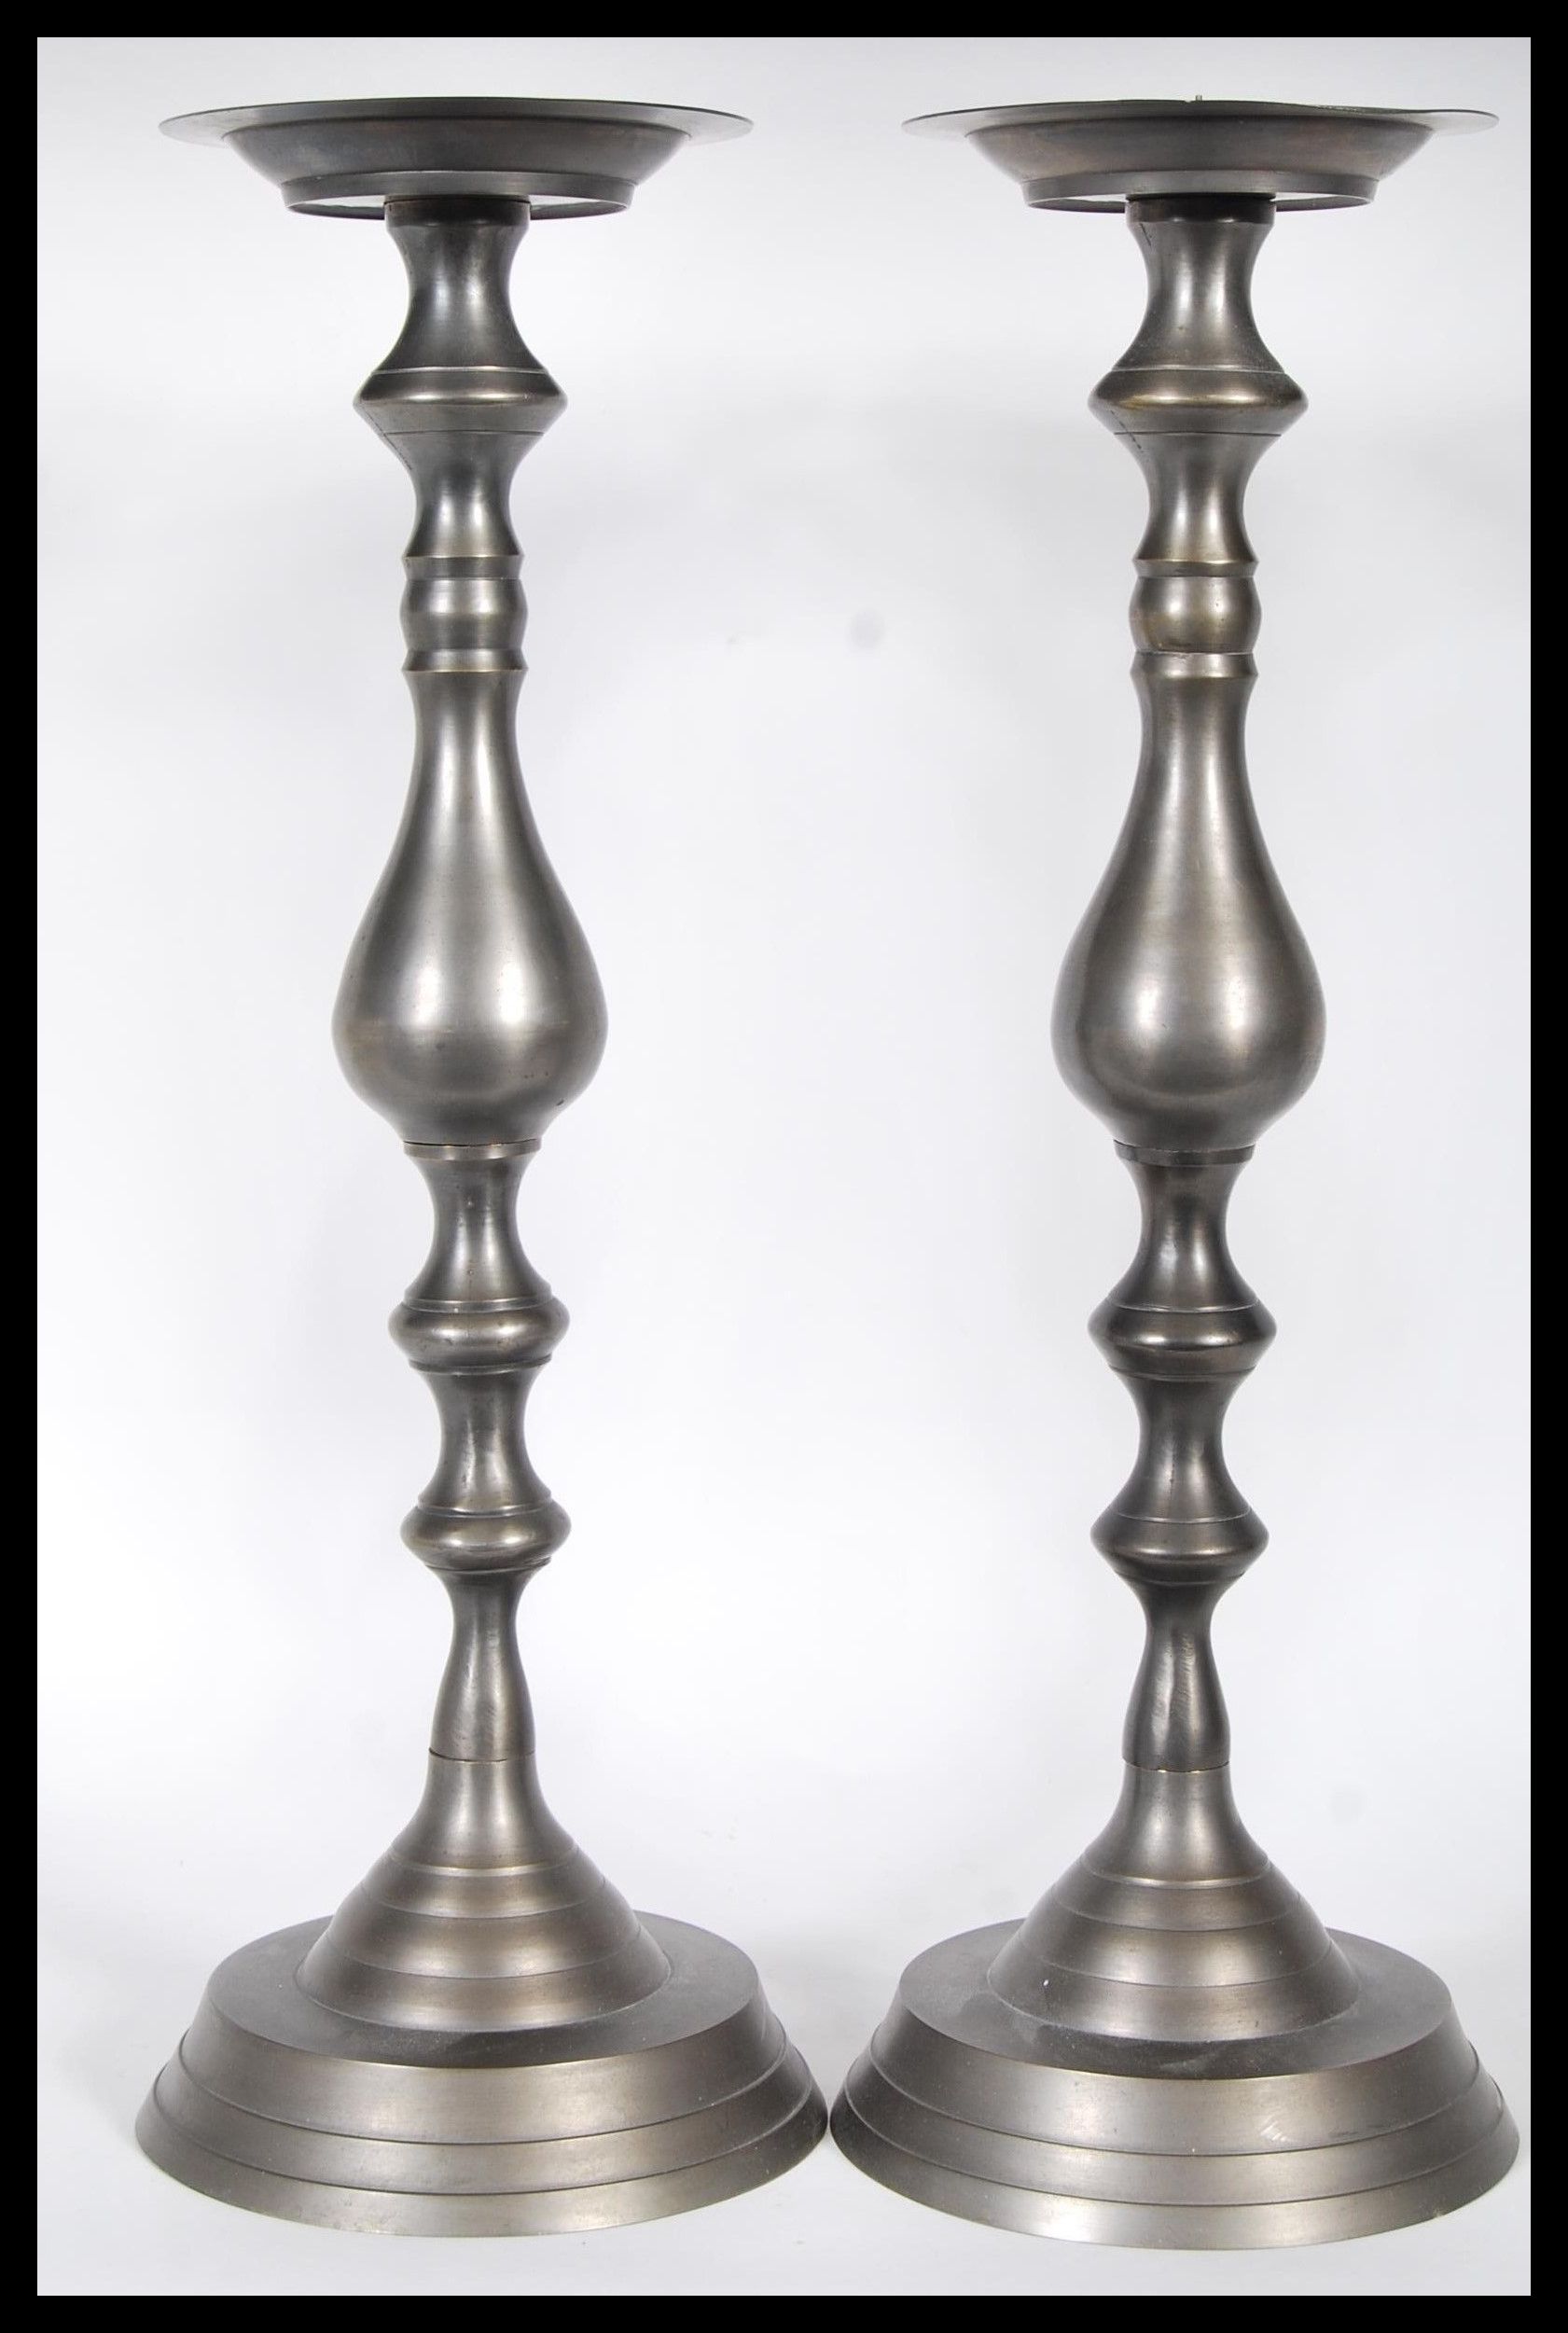 A matching pair of 18th Century style pewter ecclesiastical alter table candlesticks of large